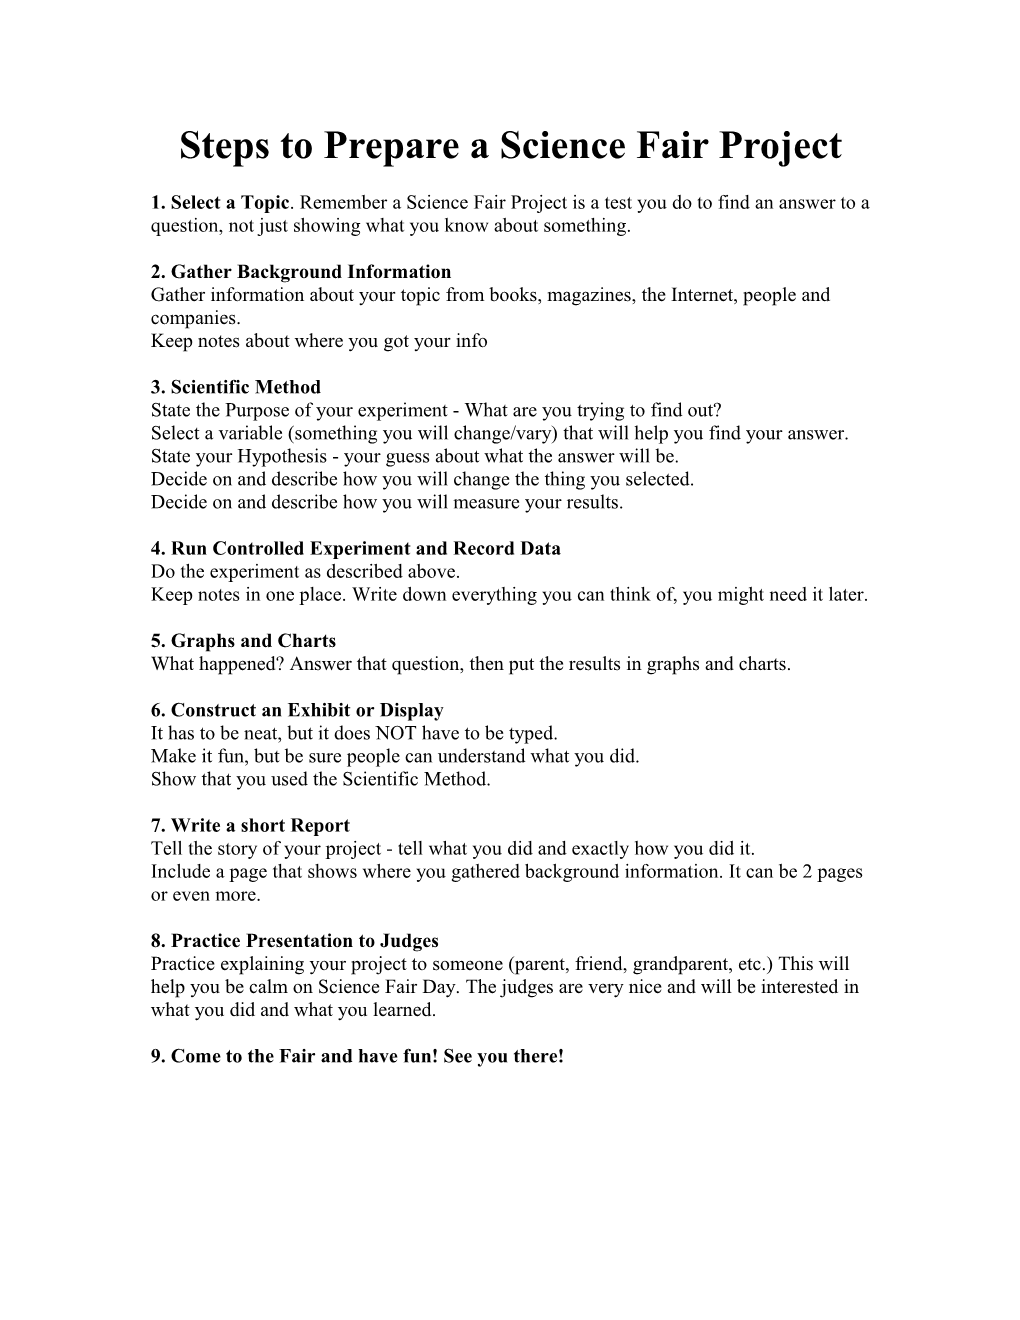 Steps to Prepare a Science Fair Project